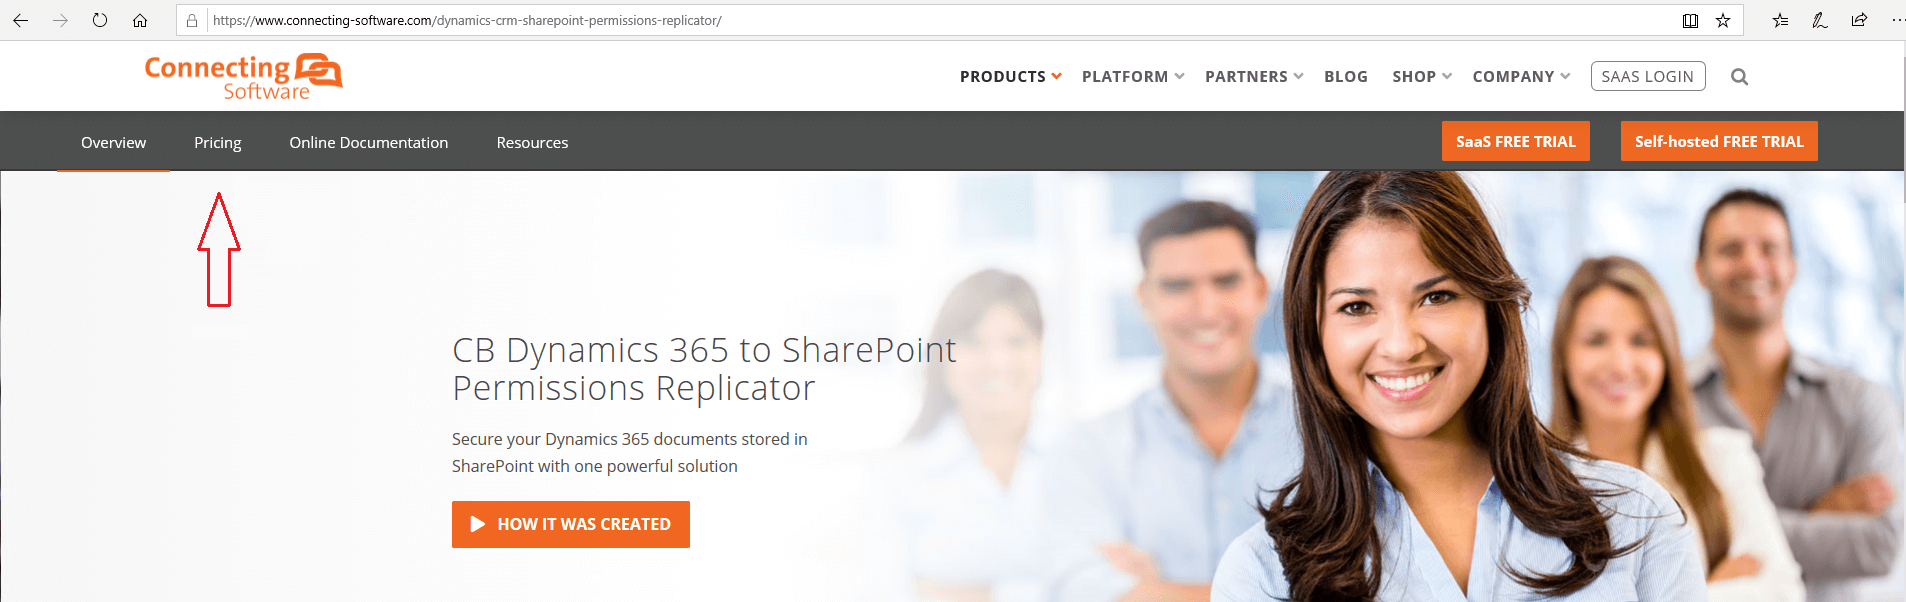 CB Dynamics 365 to SharePoint permissions Replicator - product page